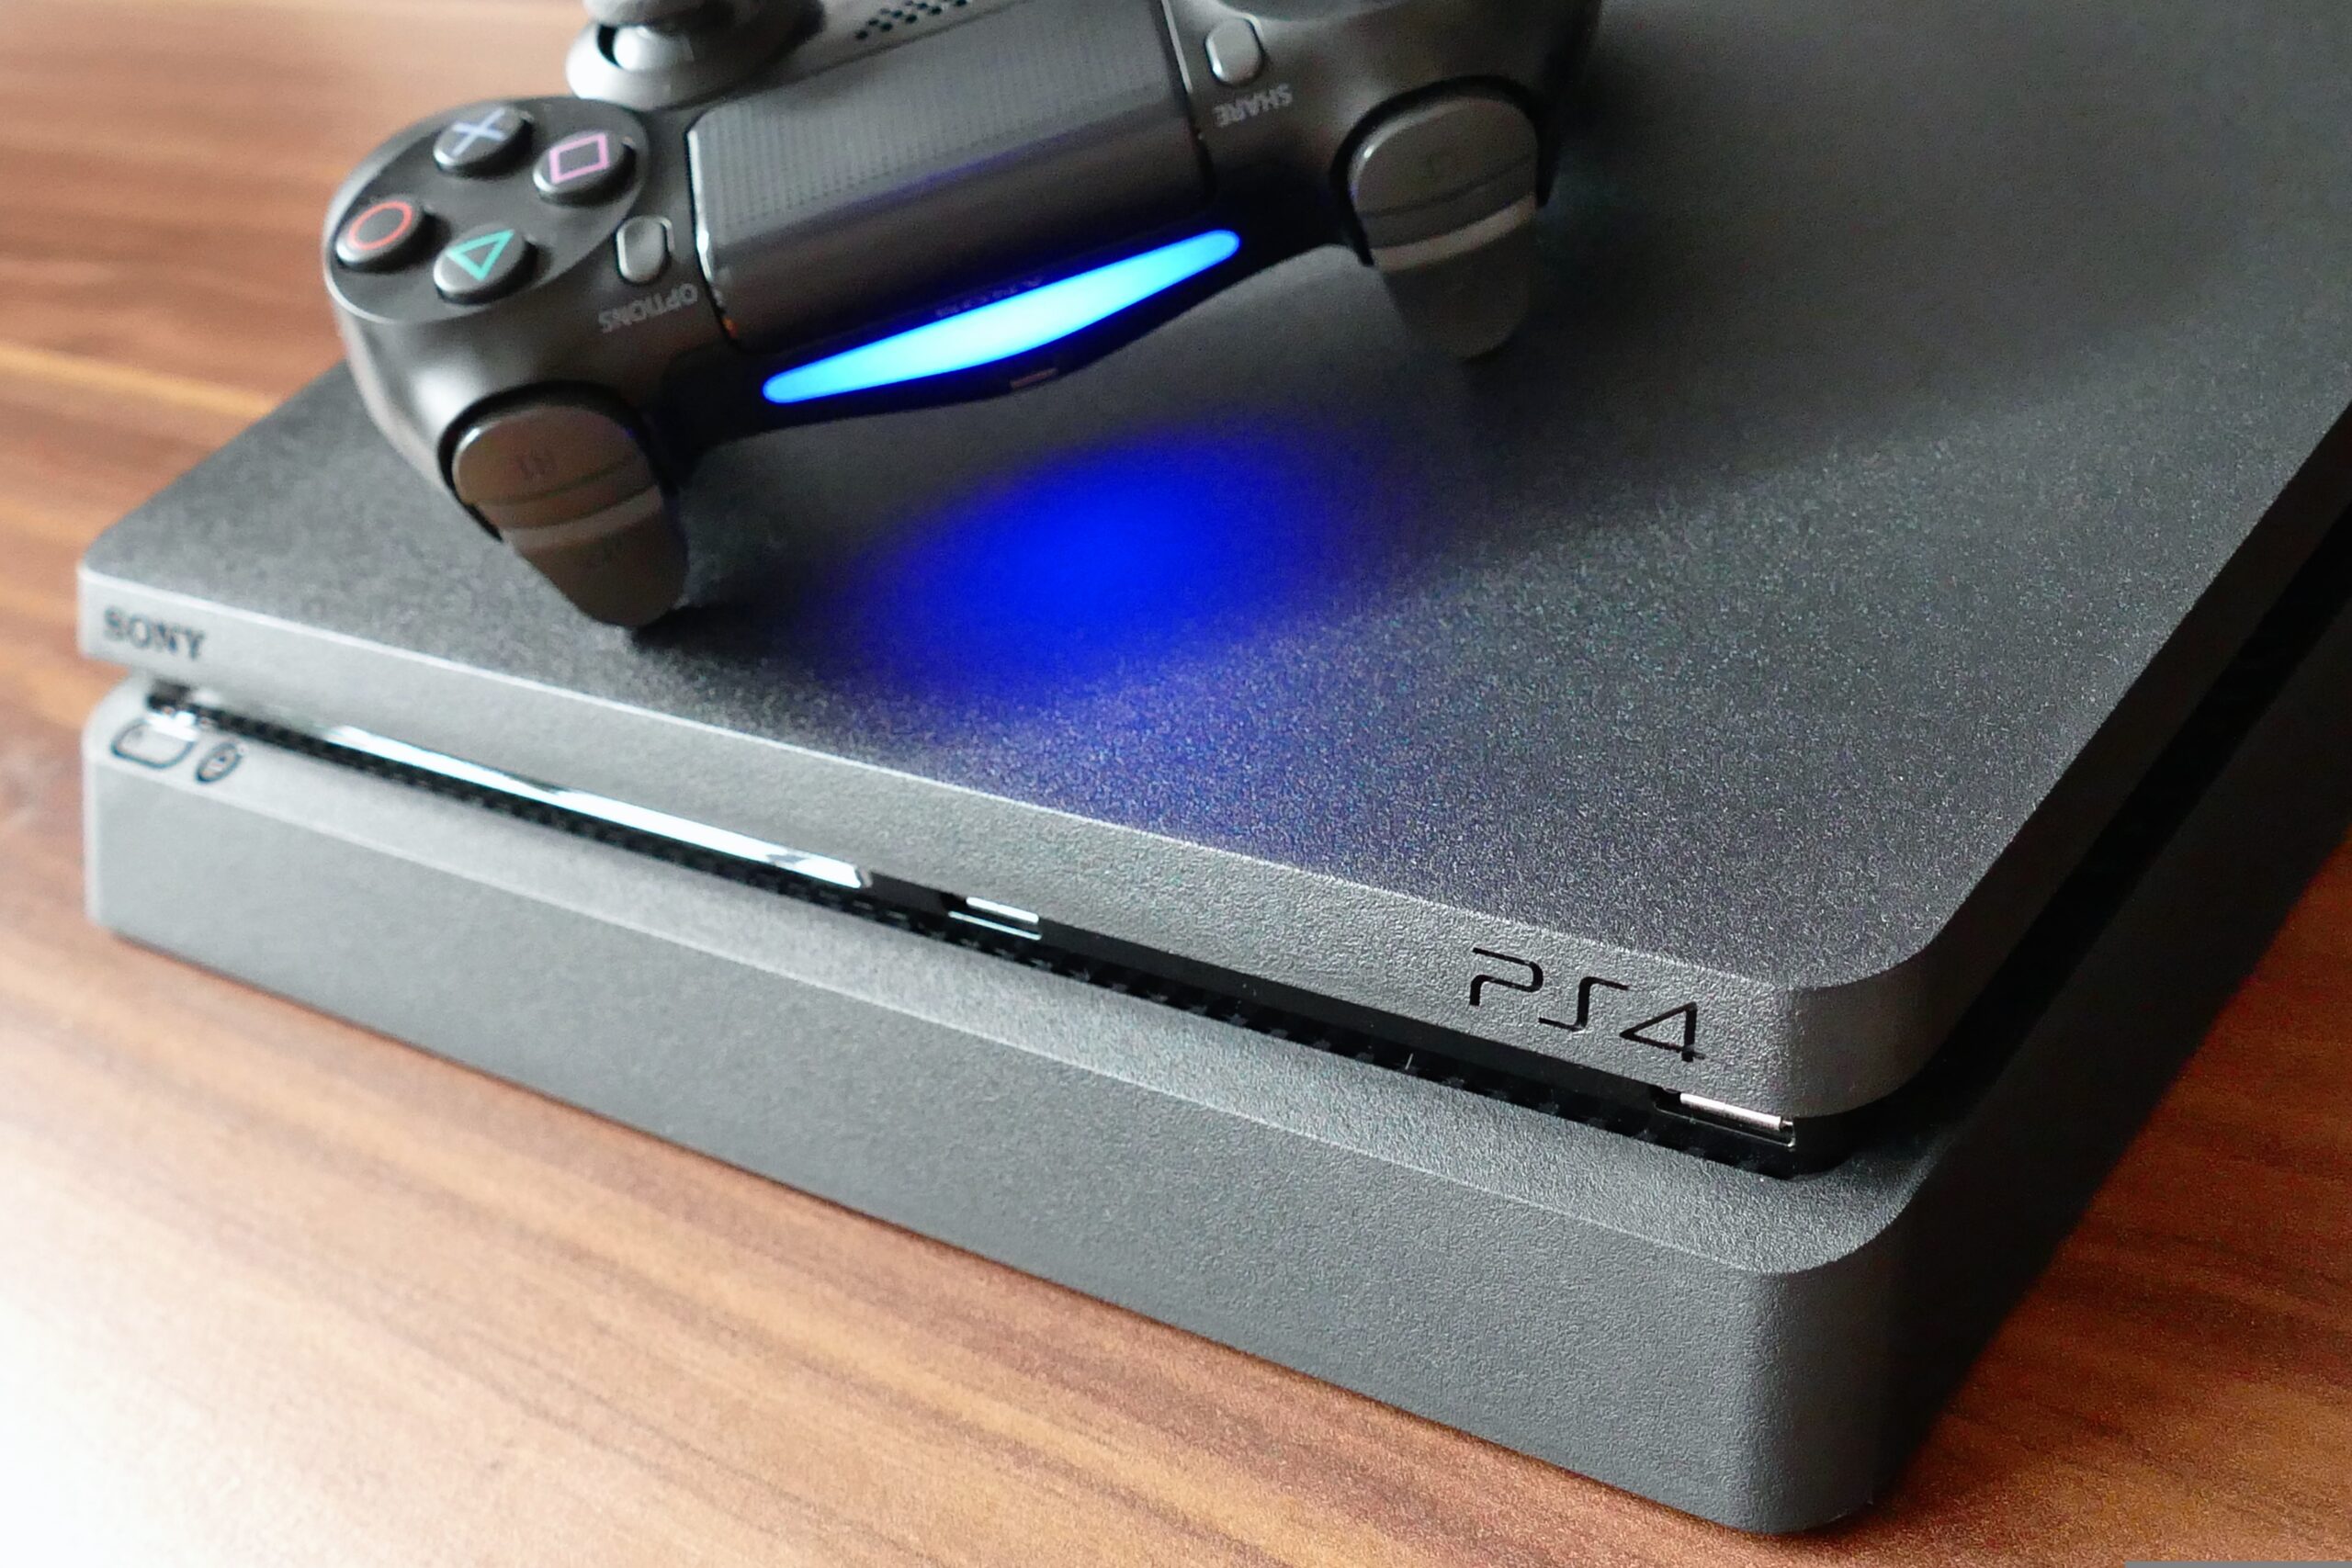 Best games for your ps4